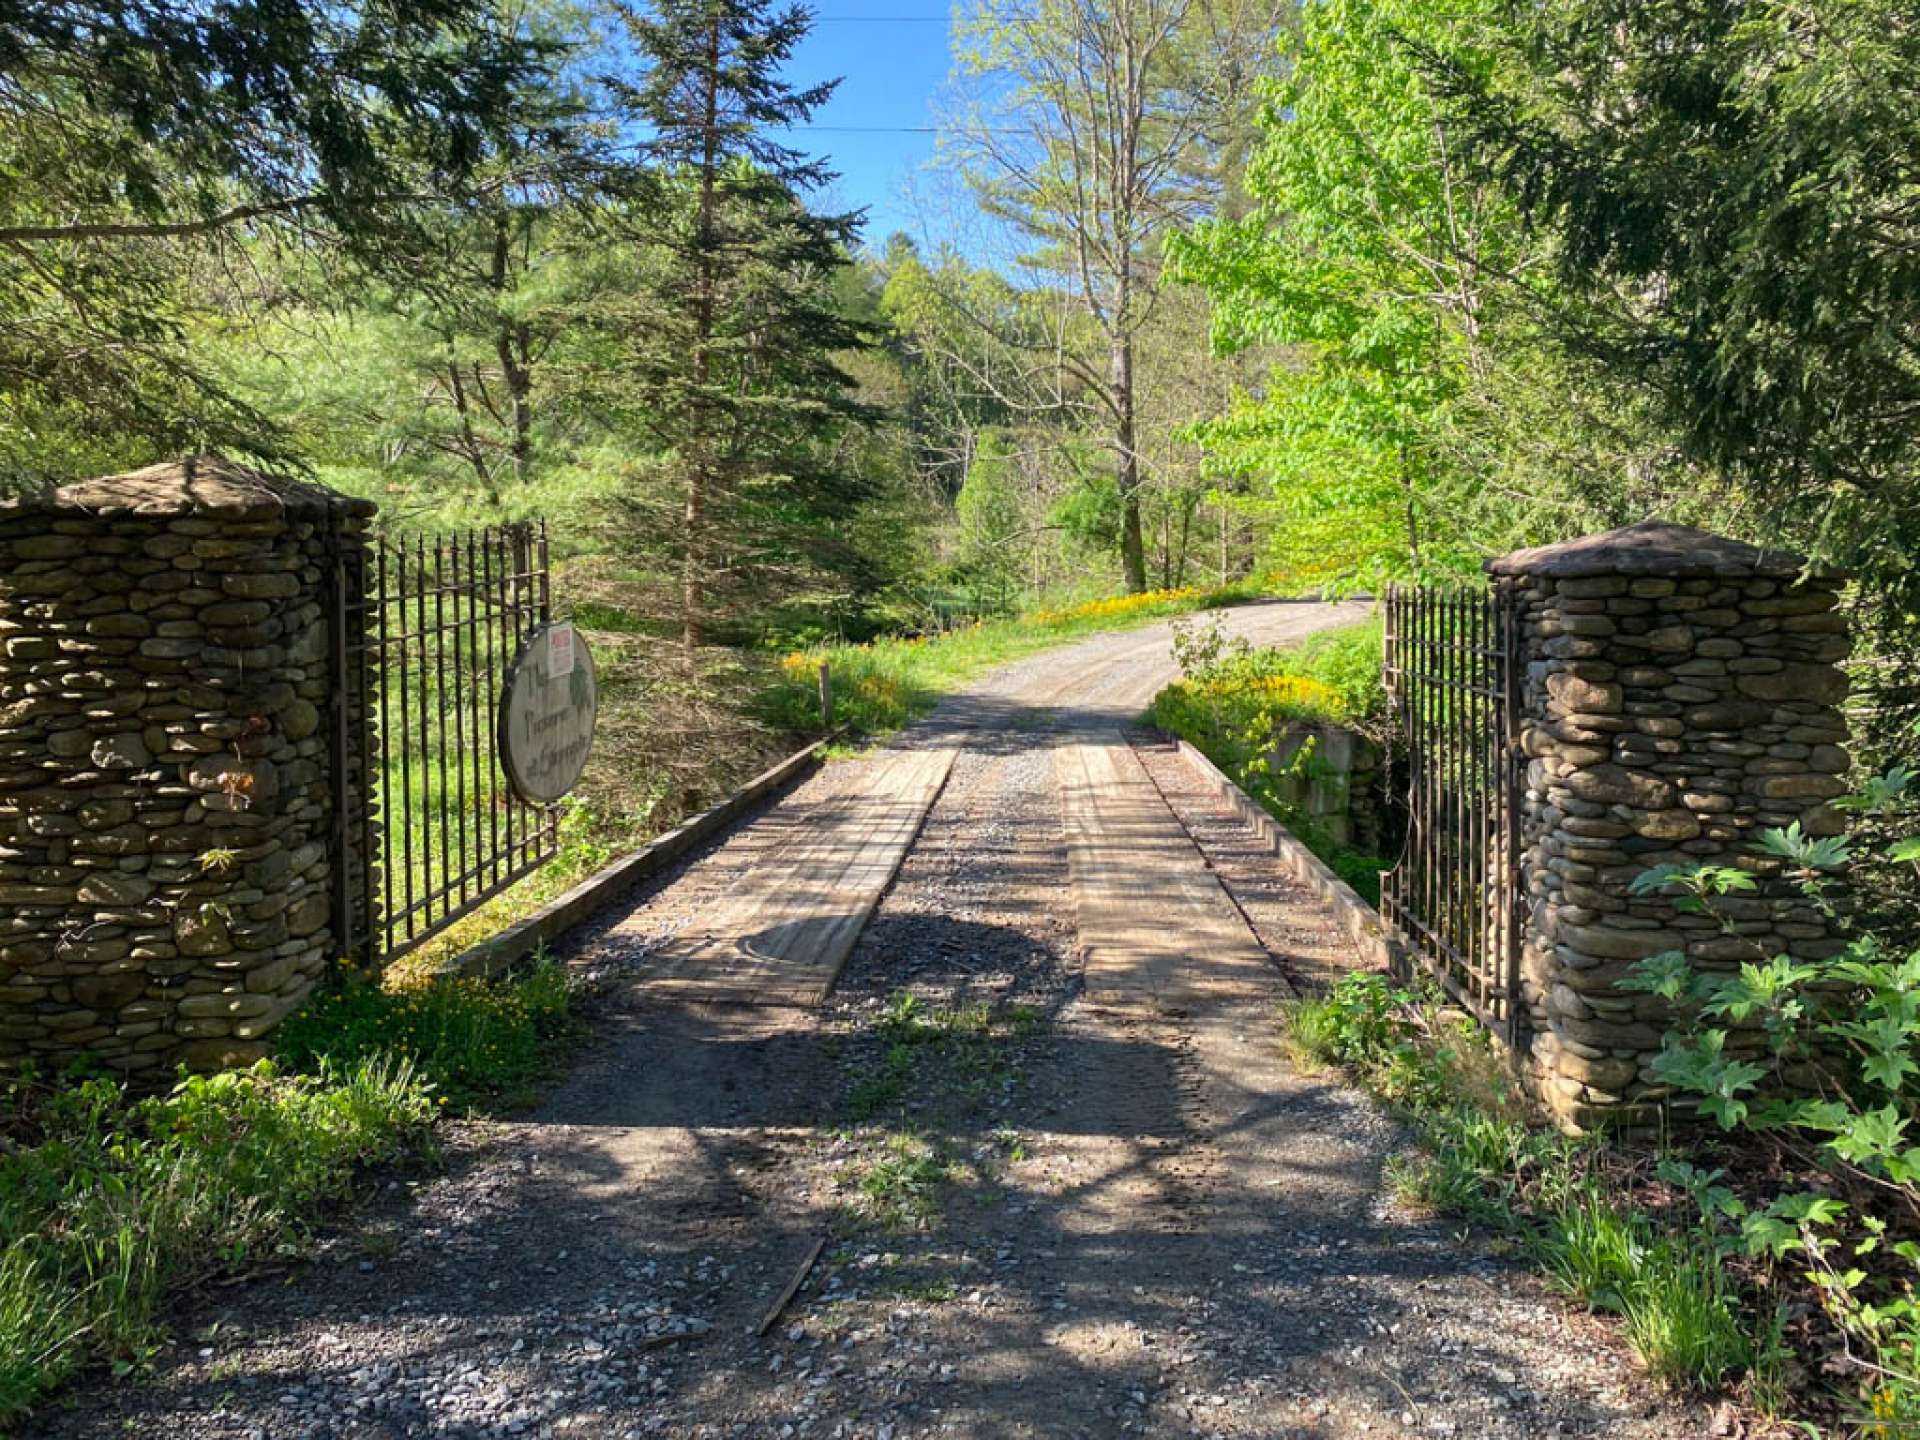 Entrance to the Preserve at Stonegate in the Creston Area of Ashe County.